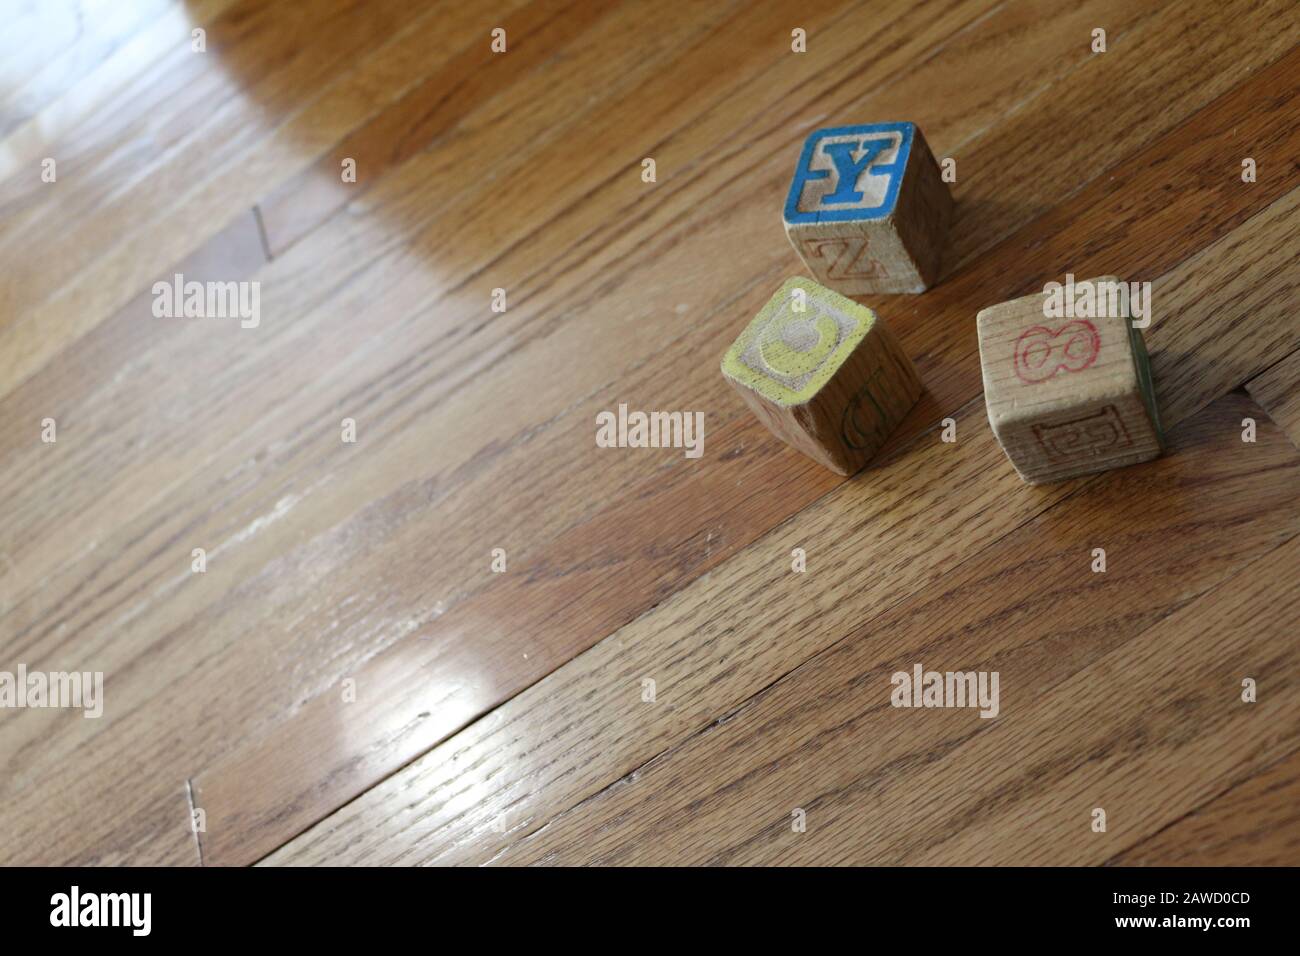 Three Old Wooden Colorful Alphabet Number Blocks on wood floor in natural light Stock Photo